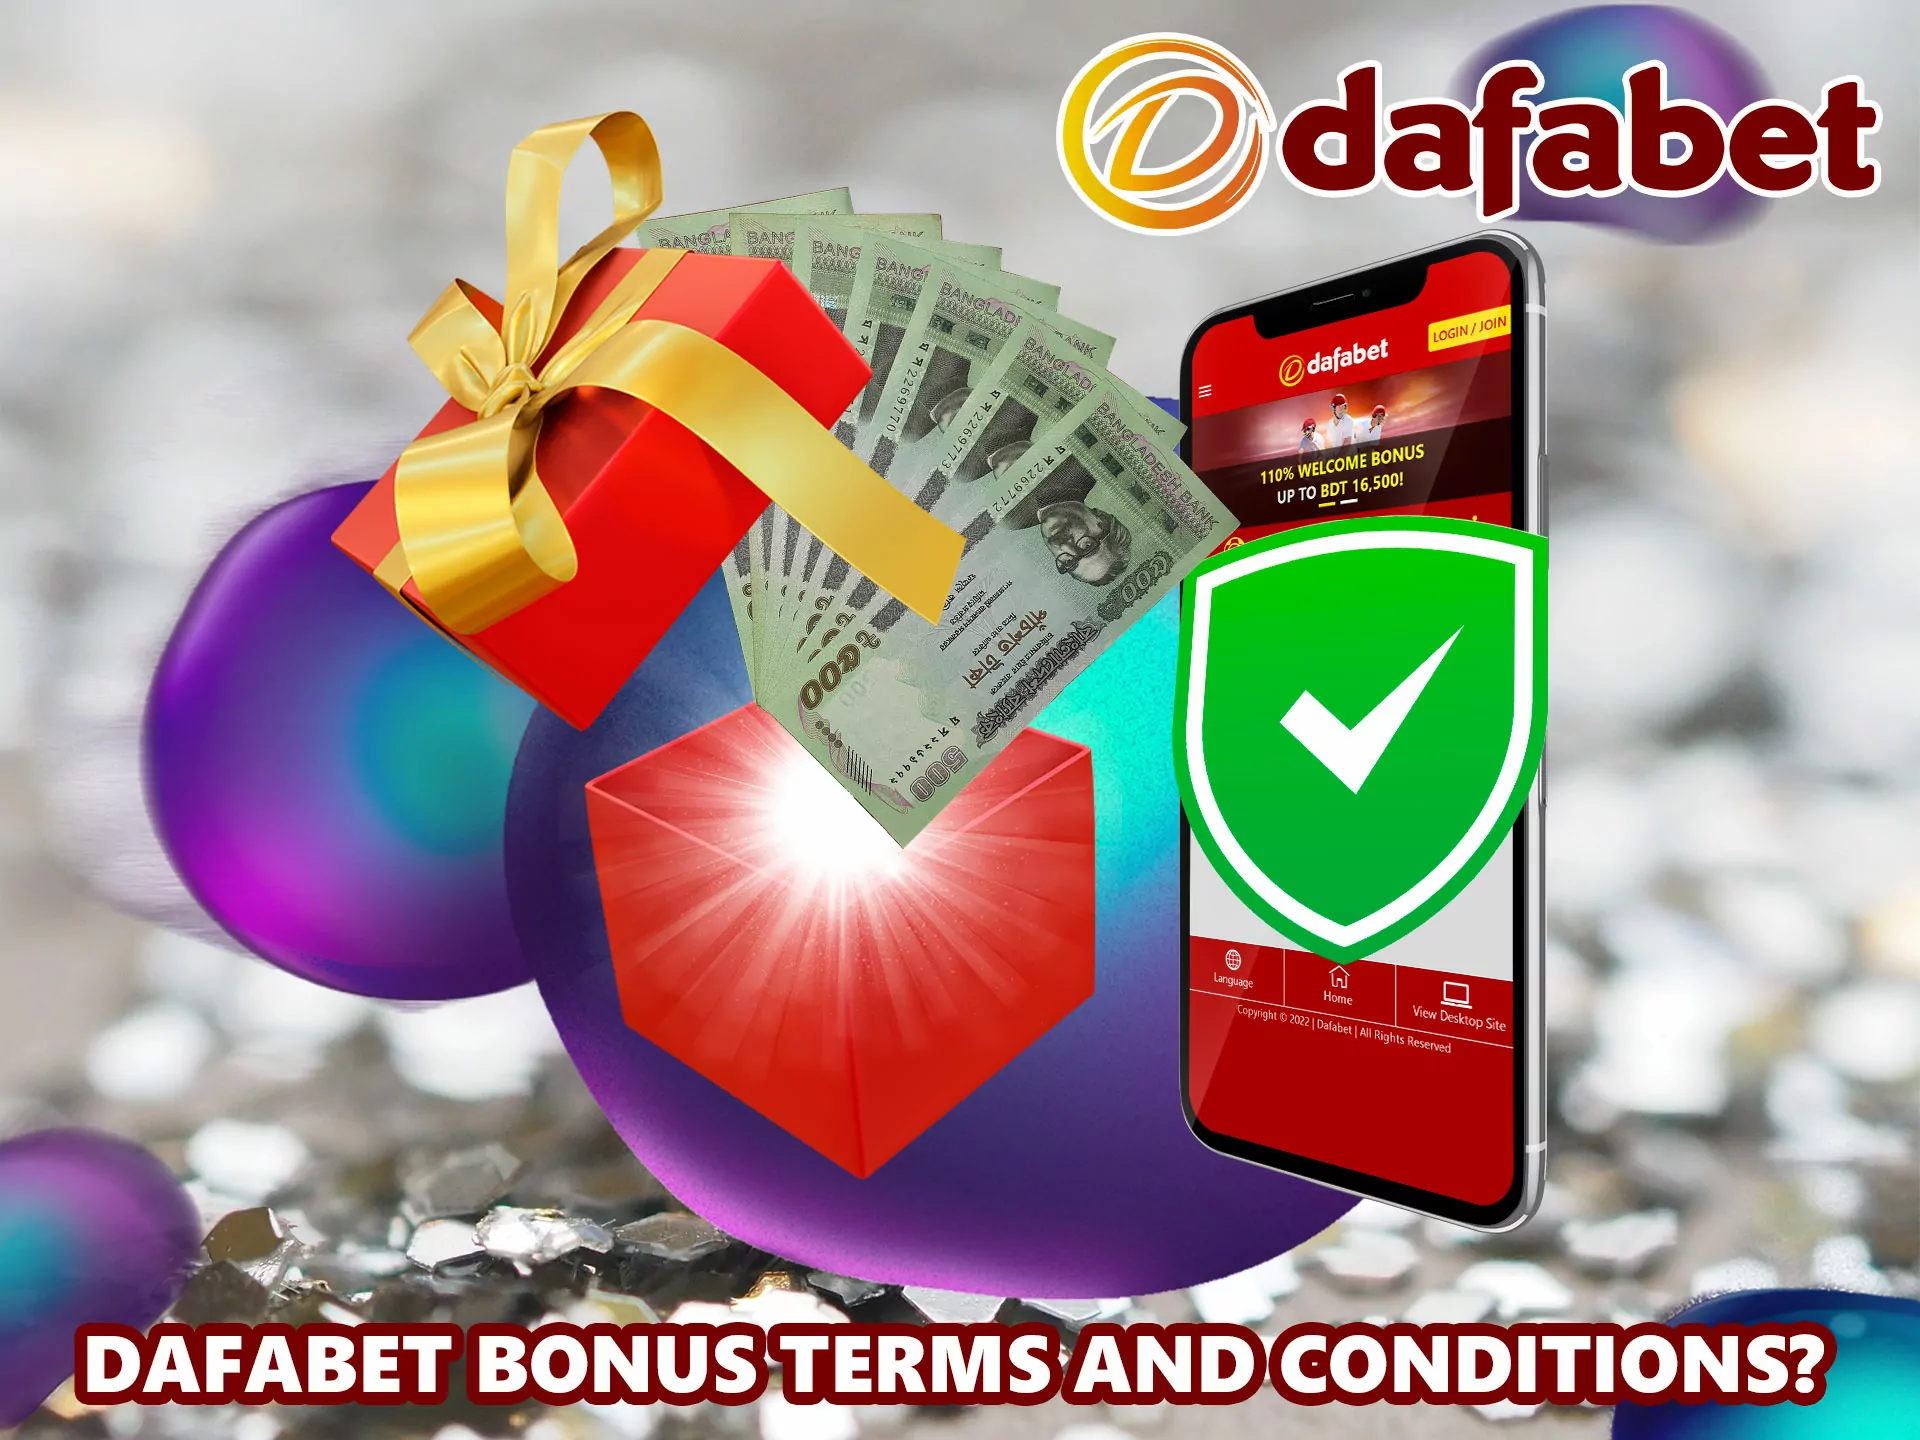 Learn more about additional points and conditions for receiving bonuses at Dafabet.